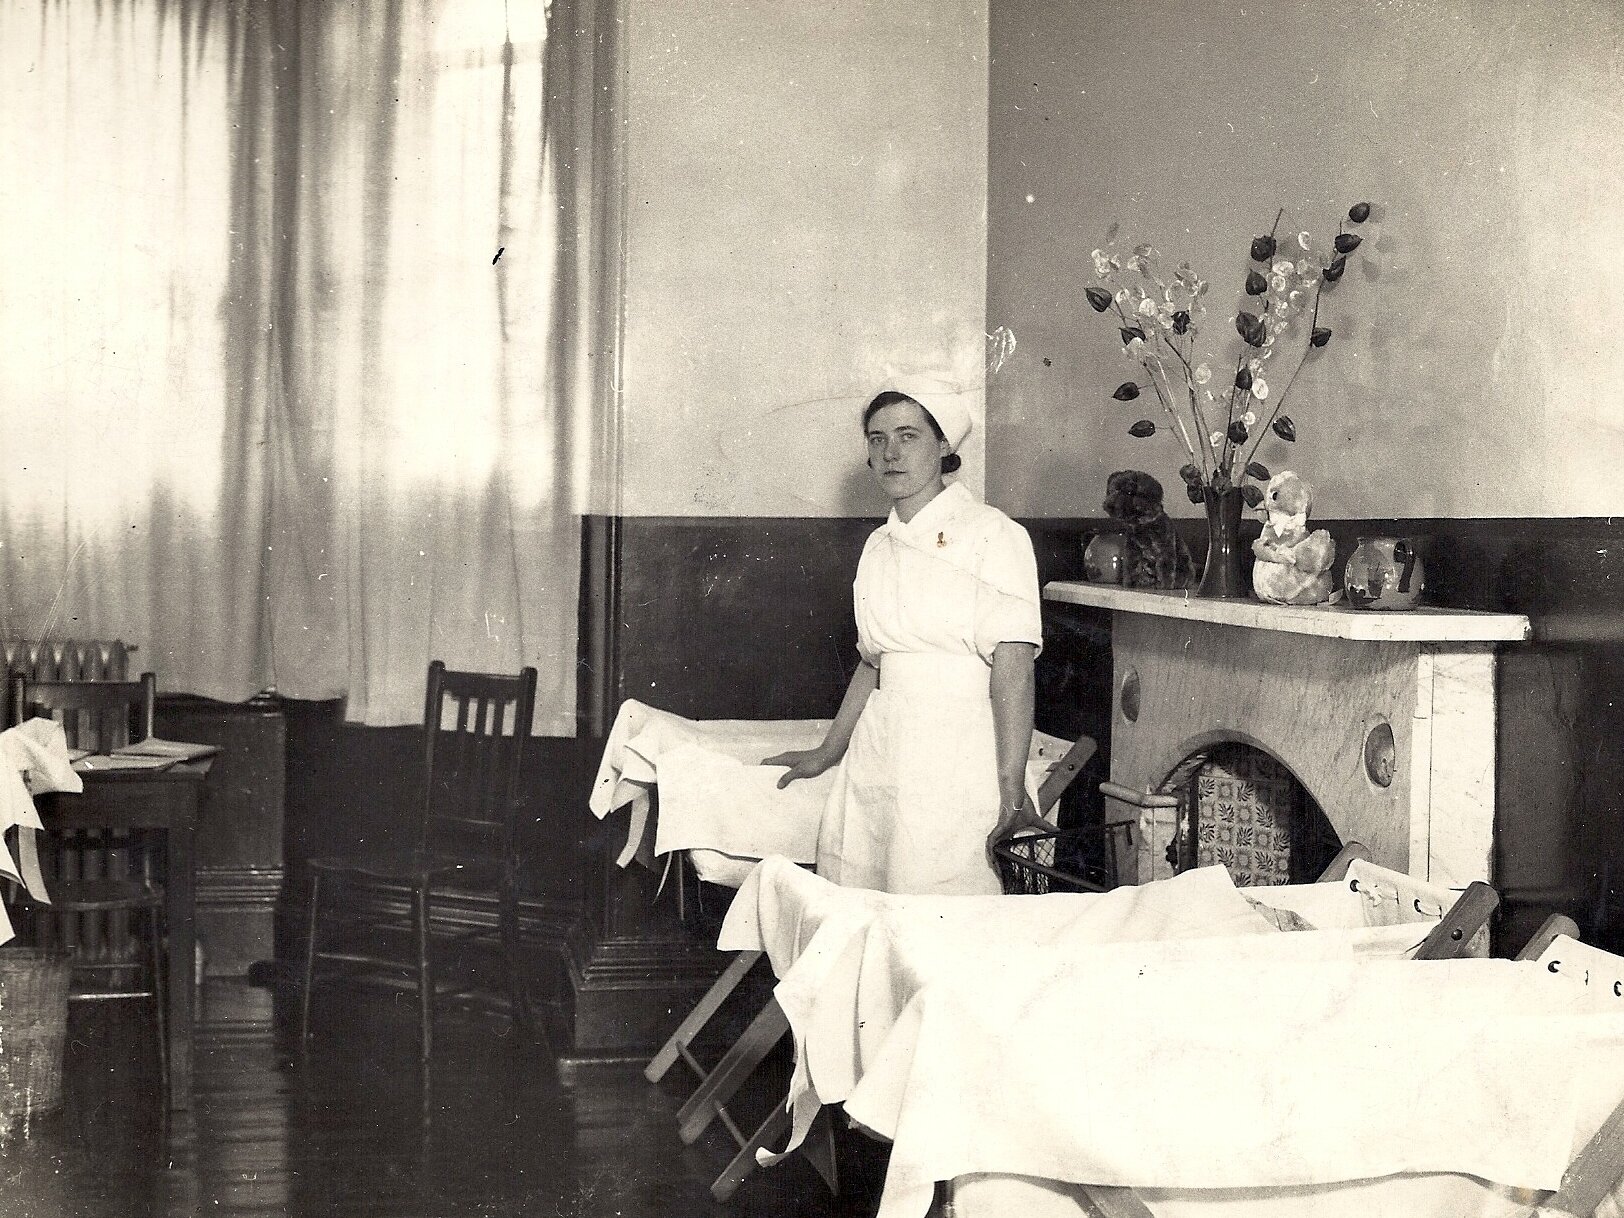 Midwife Lucy Ford at the Worcester Royal Infirmary c. 1940s